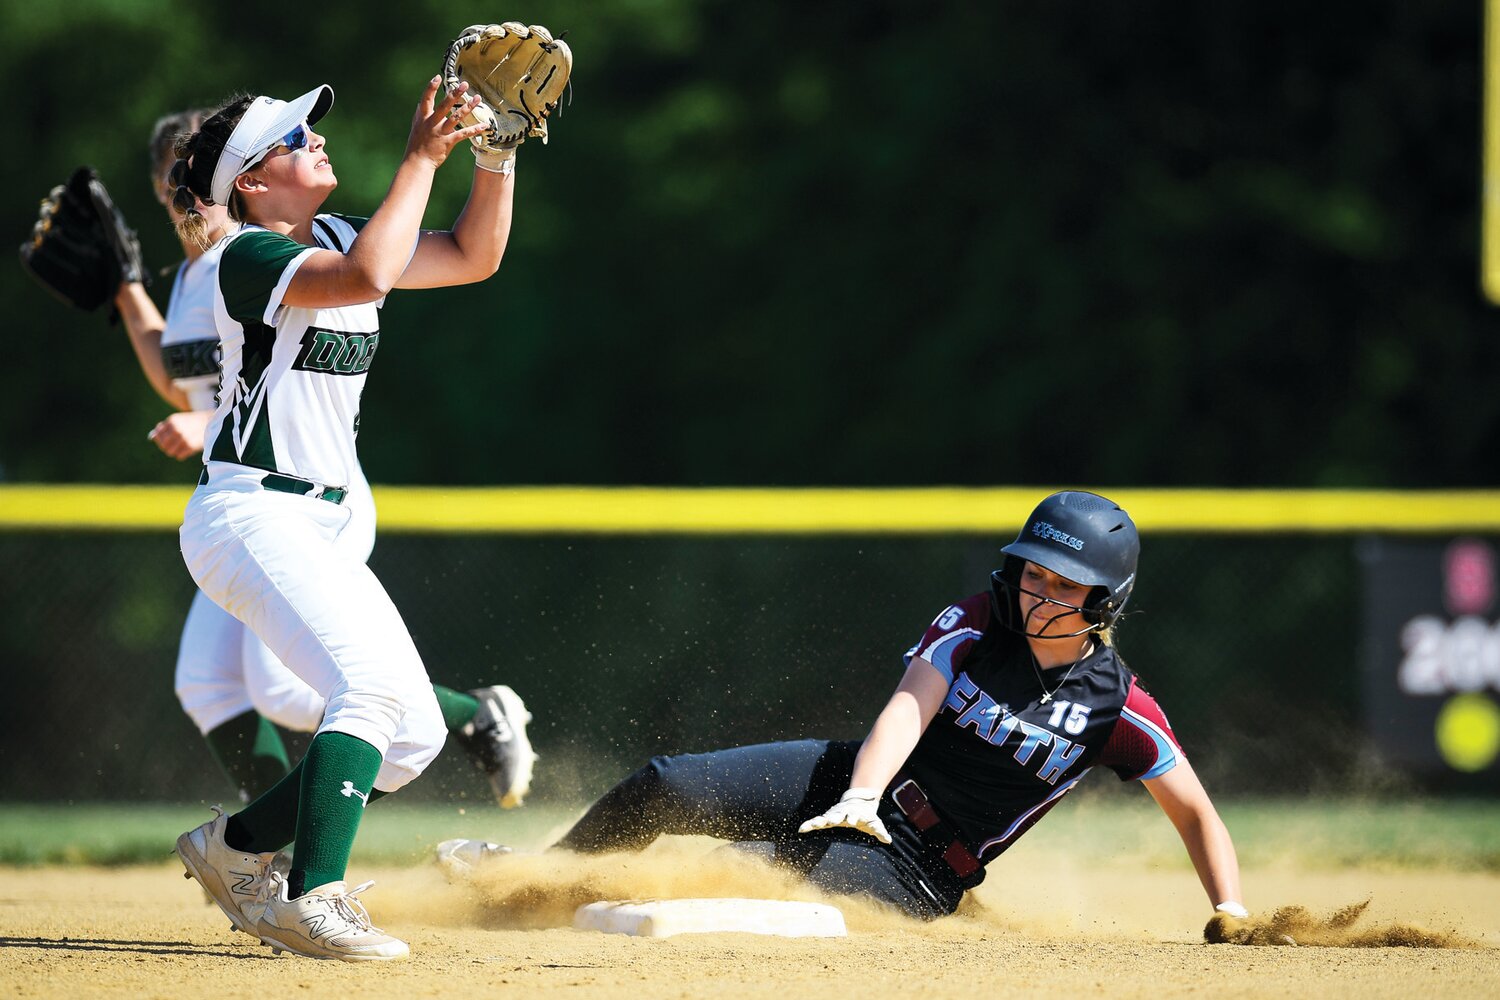 Faith Christian’s Lexi Reed slides in ahead of the throw in front of Dock Mennonite’s Addison Landis during the third inning.